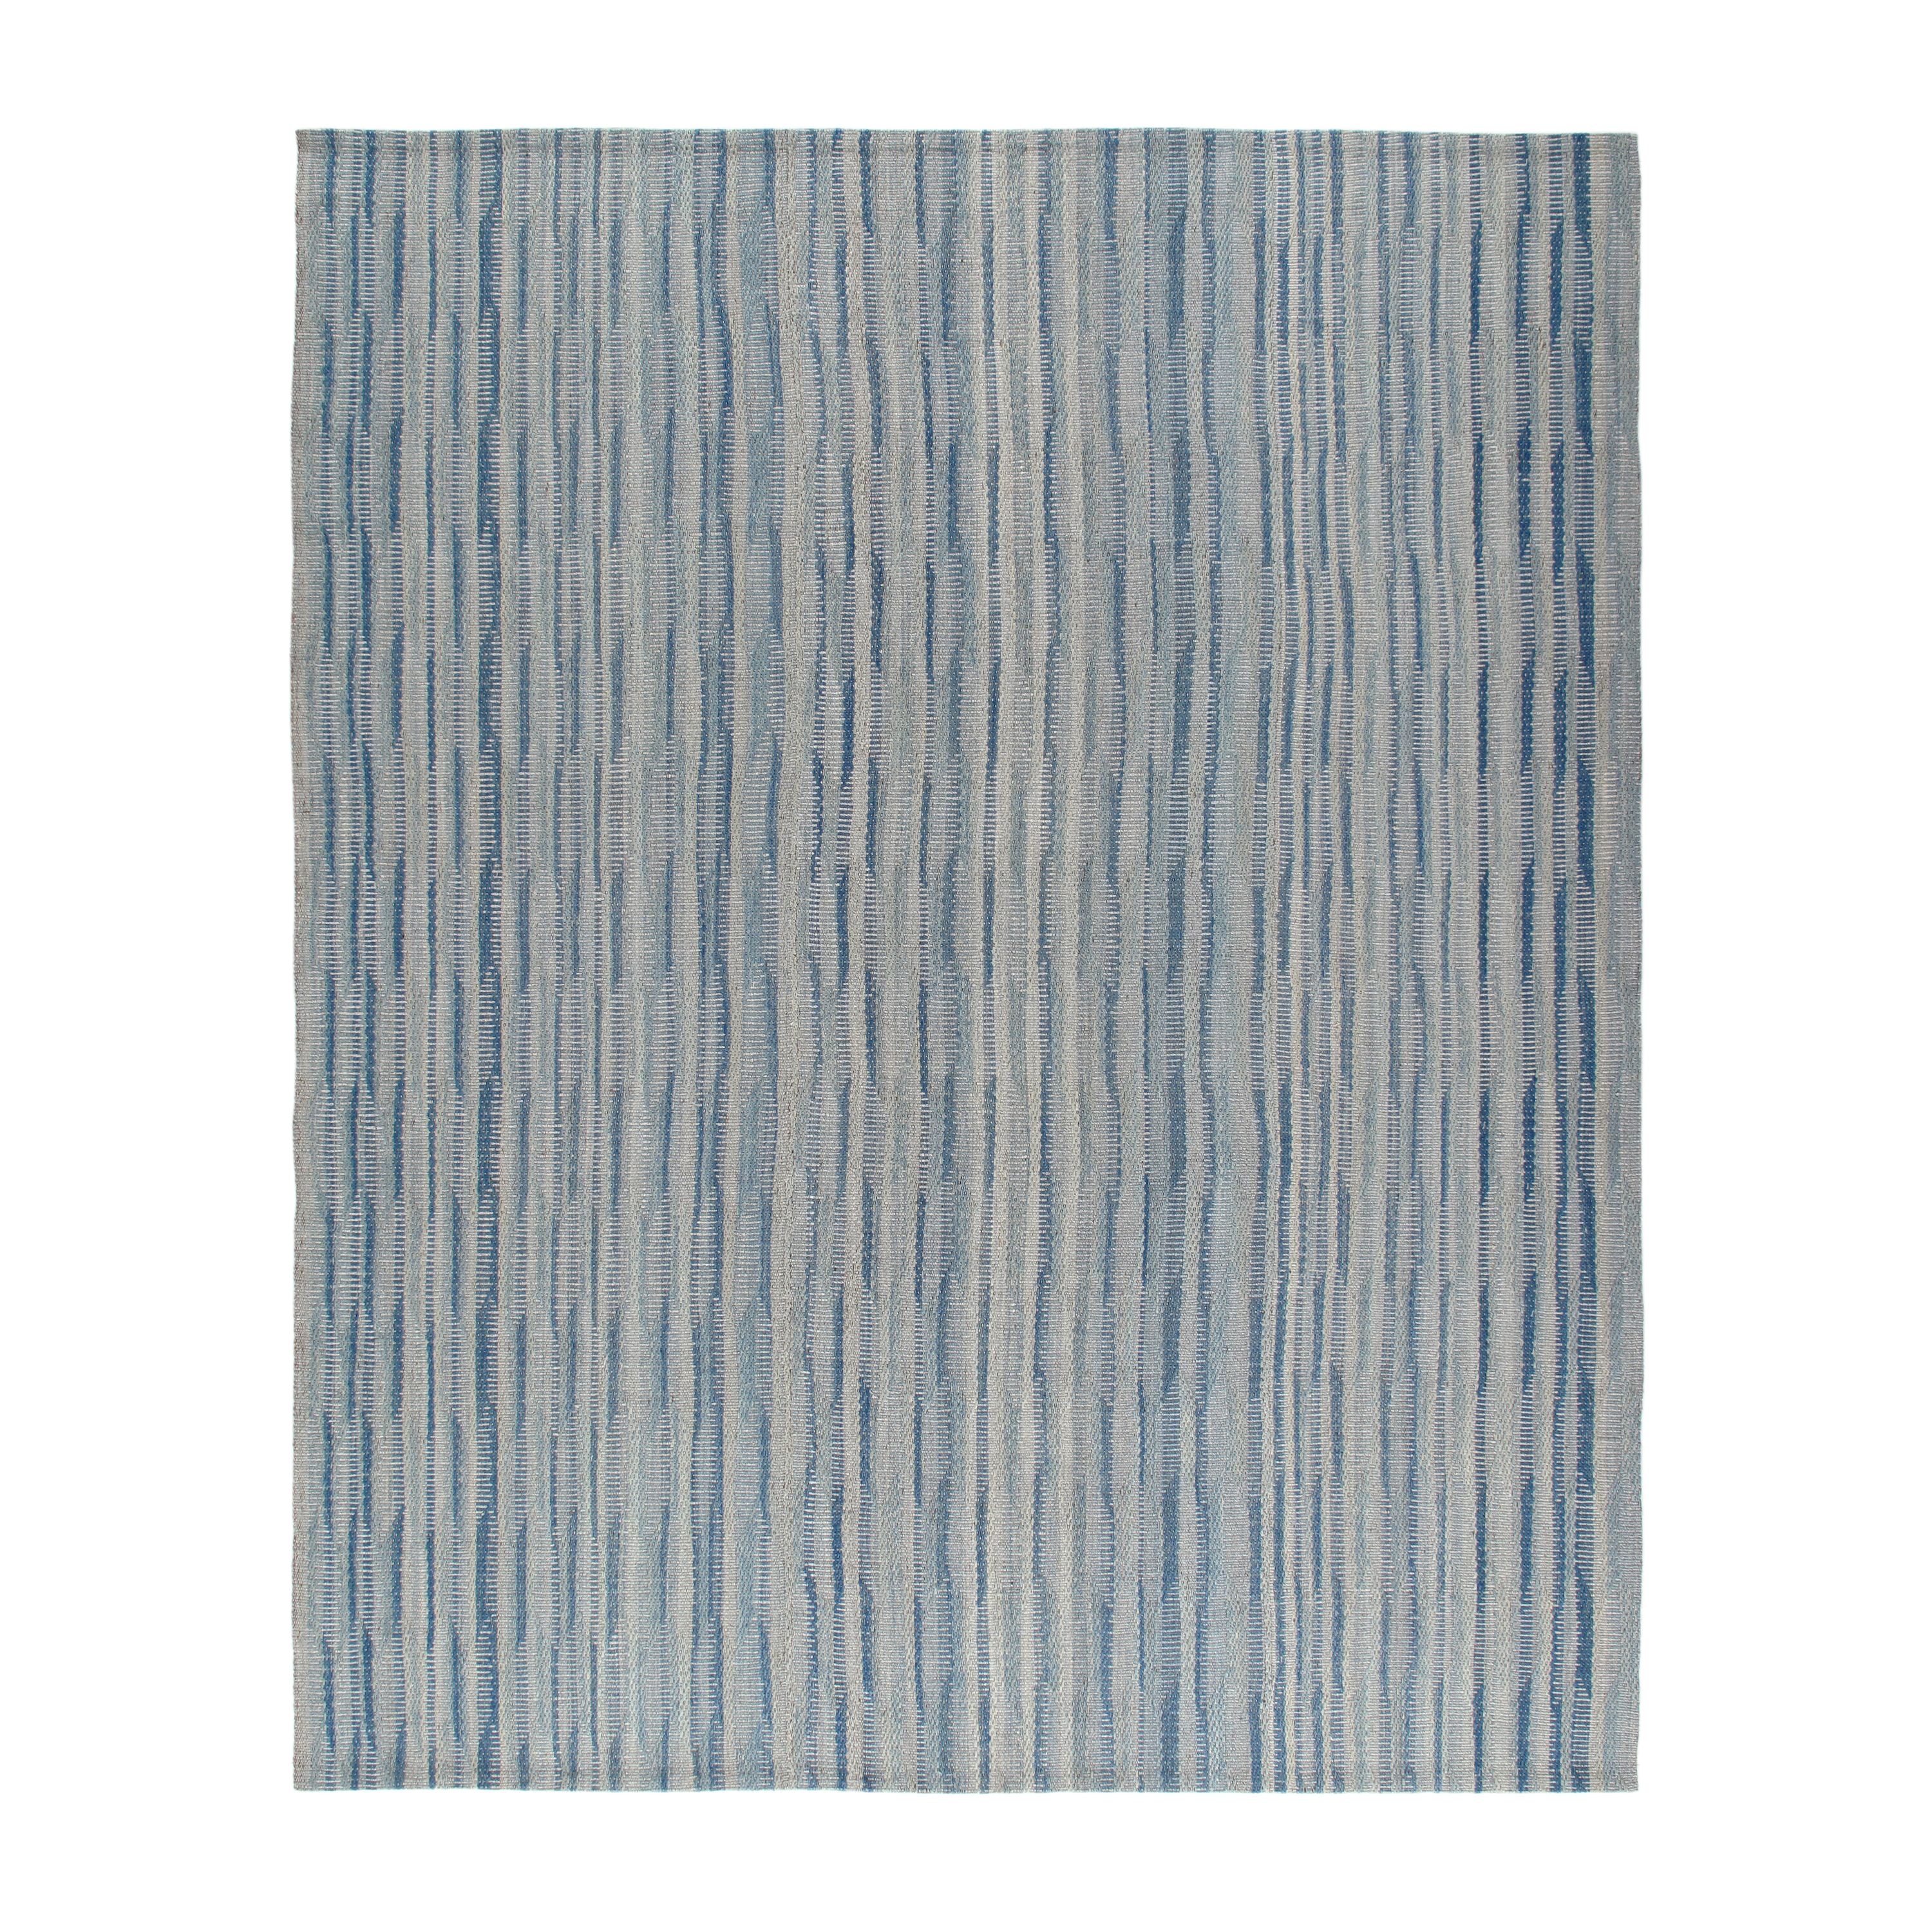 This Pelas Douro flatweave rug is made with handspun wool and natural dyes.